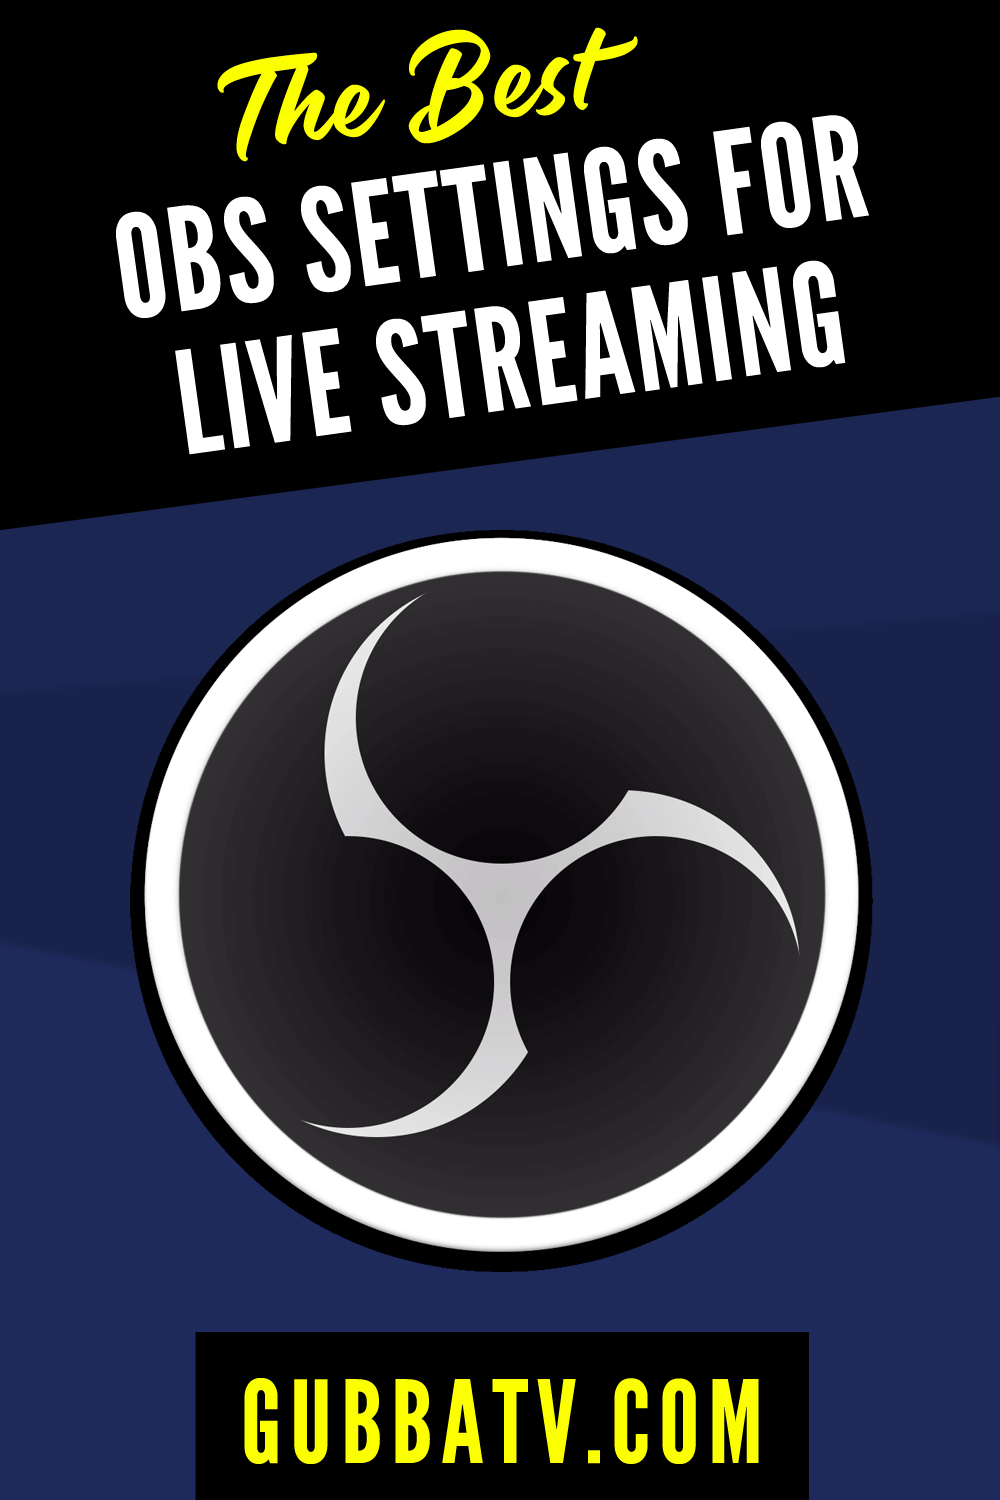 The Best OBS Settings For Live Streaming